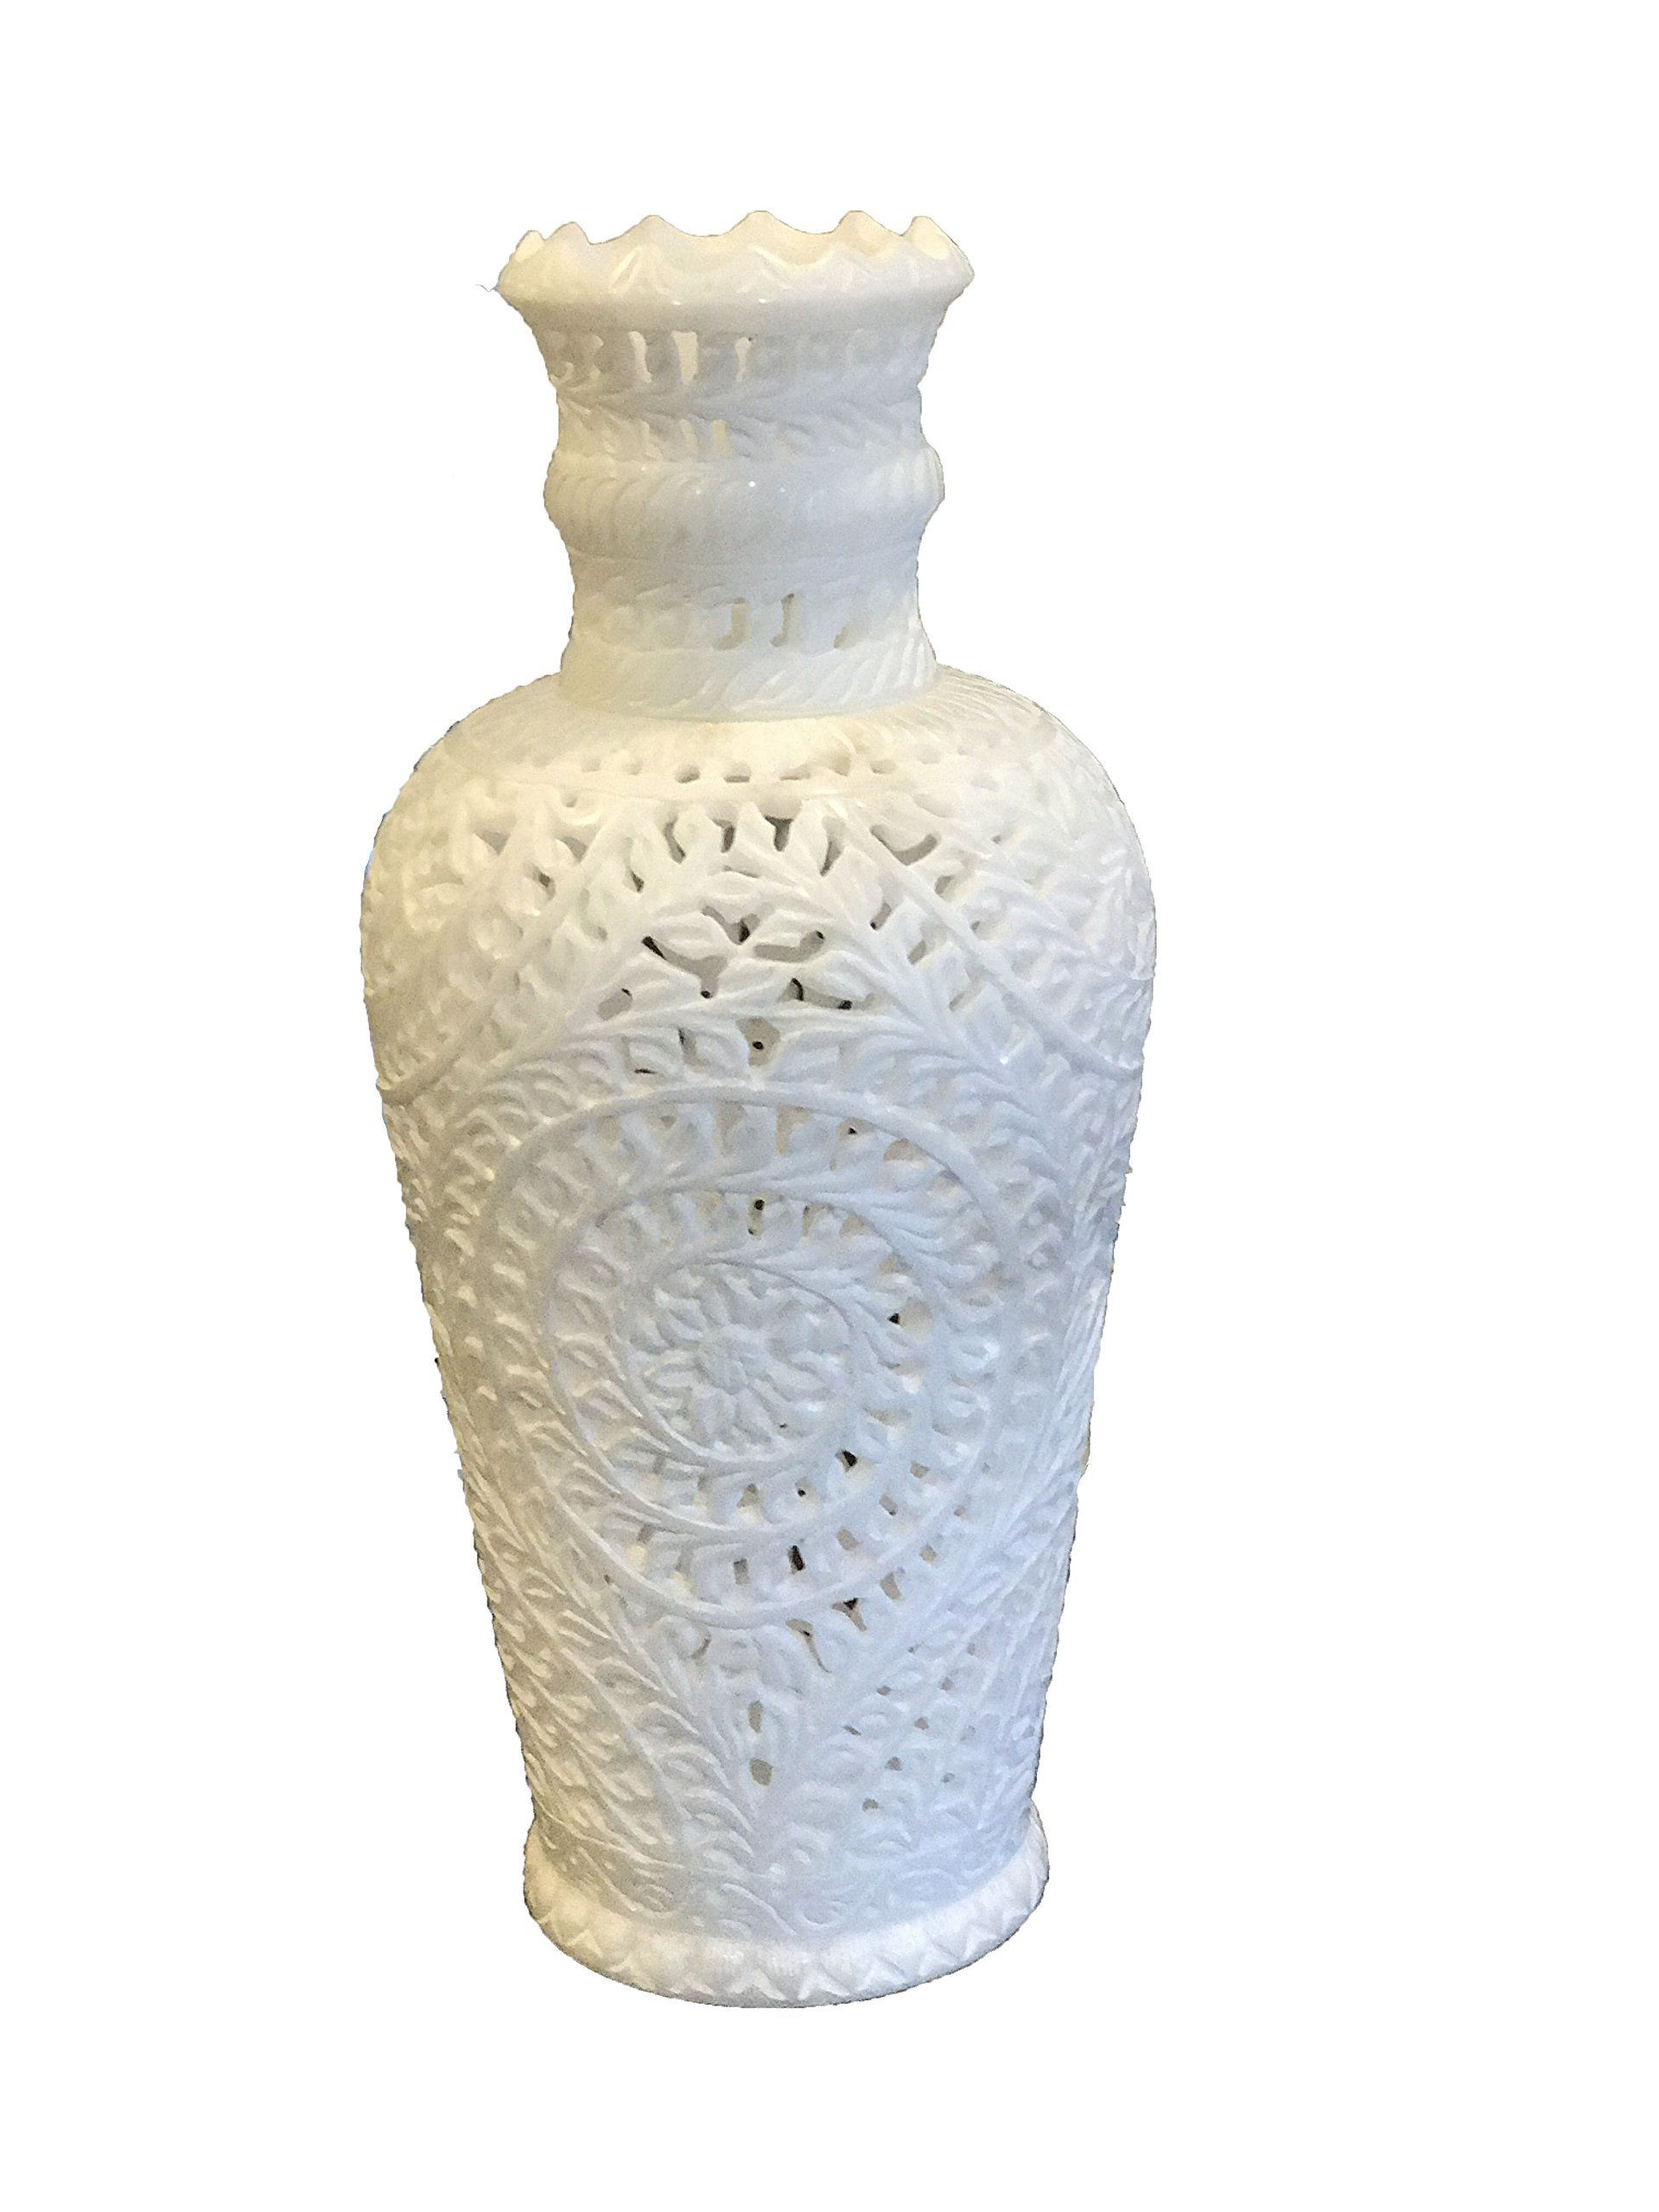 13 Nice Small Vases Bulk 2024 free download small vases bulk of white marble flower vase handcrafted stone decorative wedding diy with white marble flower vase handcrafted stone decorative wedding diy vases handcrafted by artisans thi